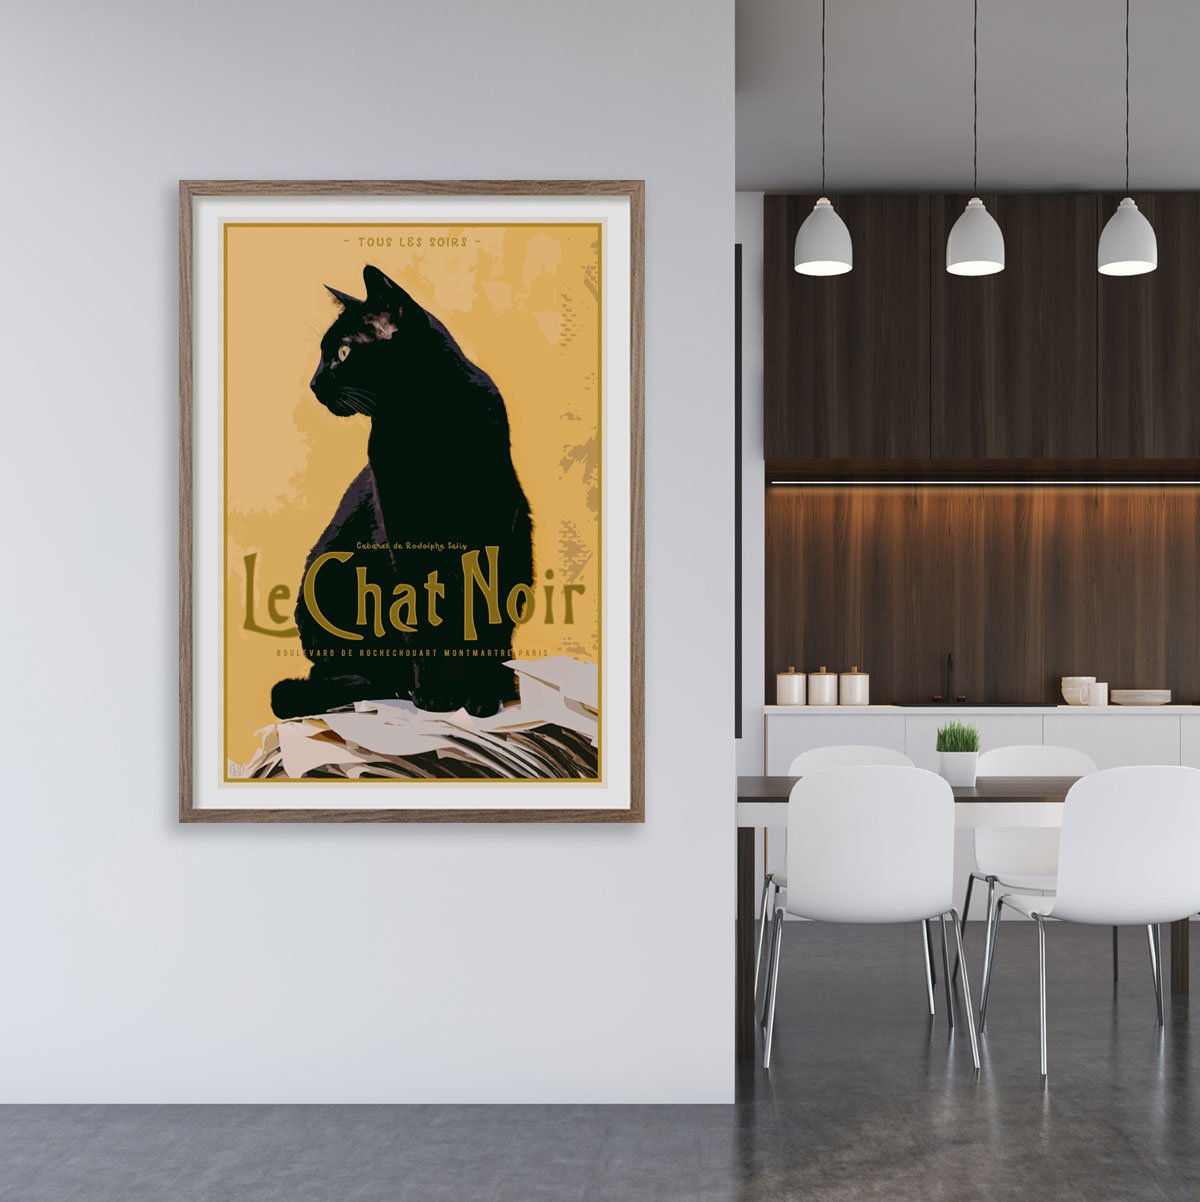 Le Chat Noir vintage travel style framed print by places we luv